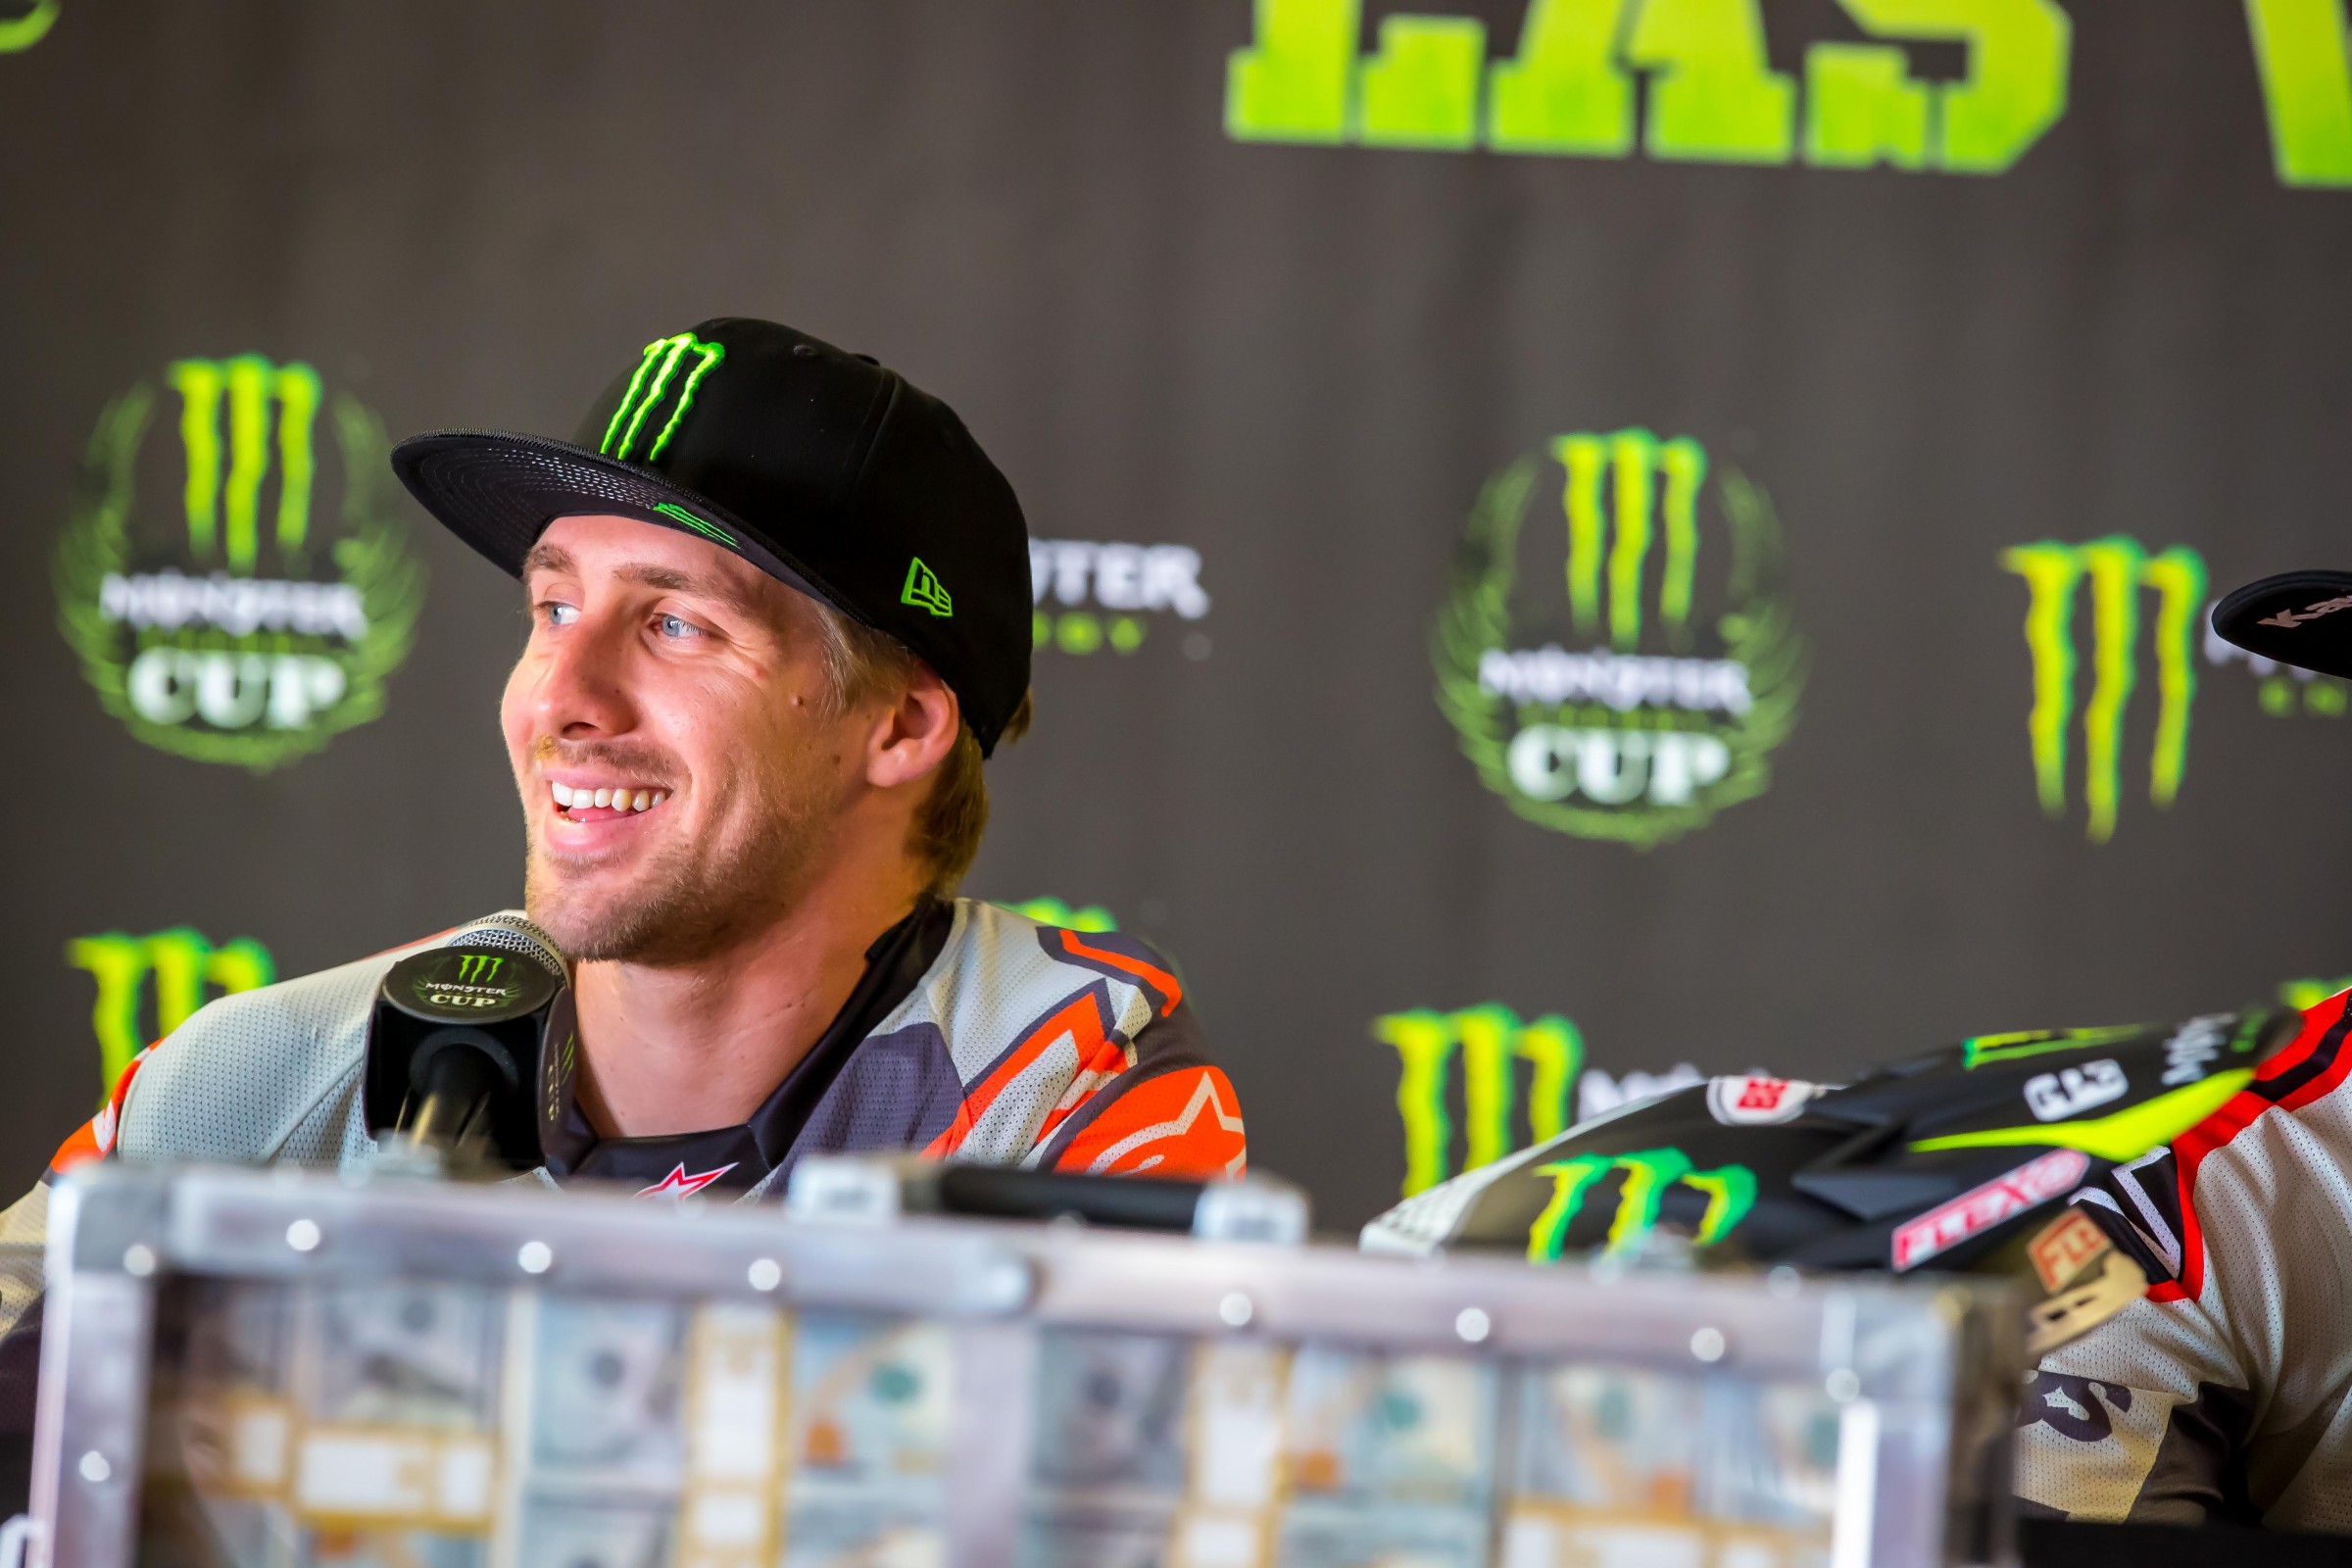 Five Riders Yet to Announce Deals - Racer X